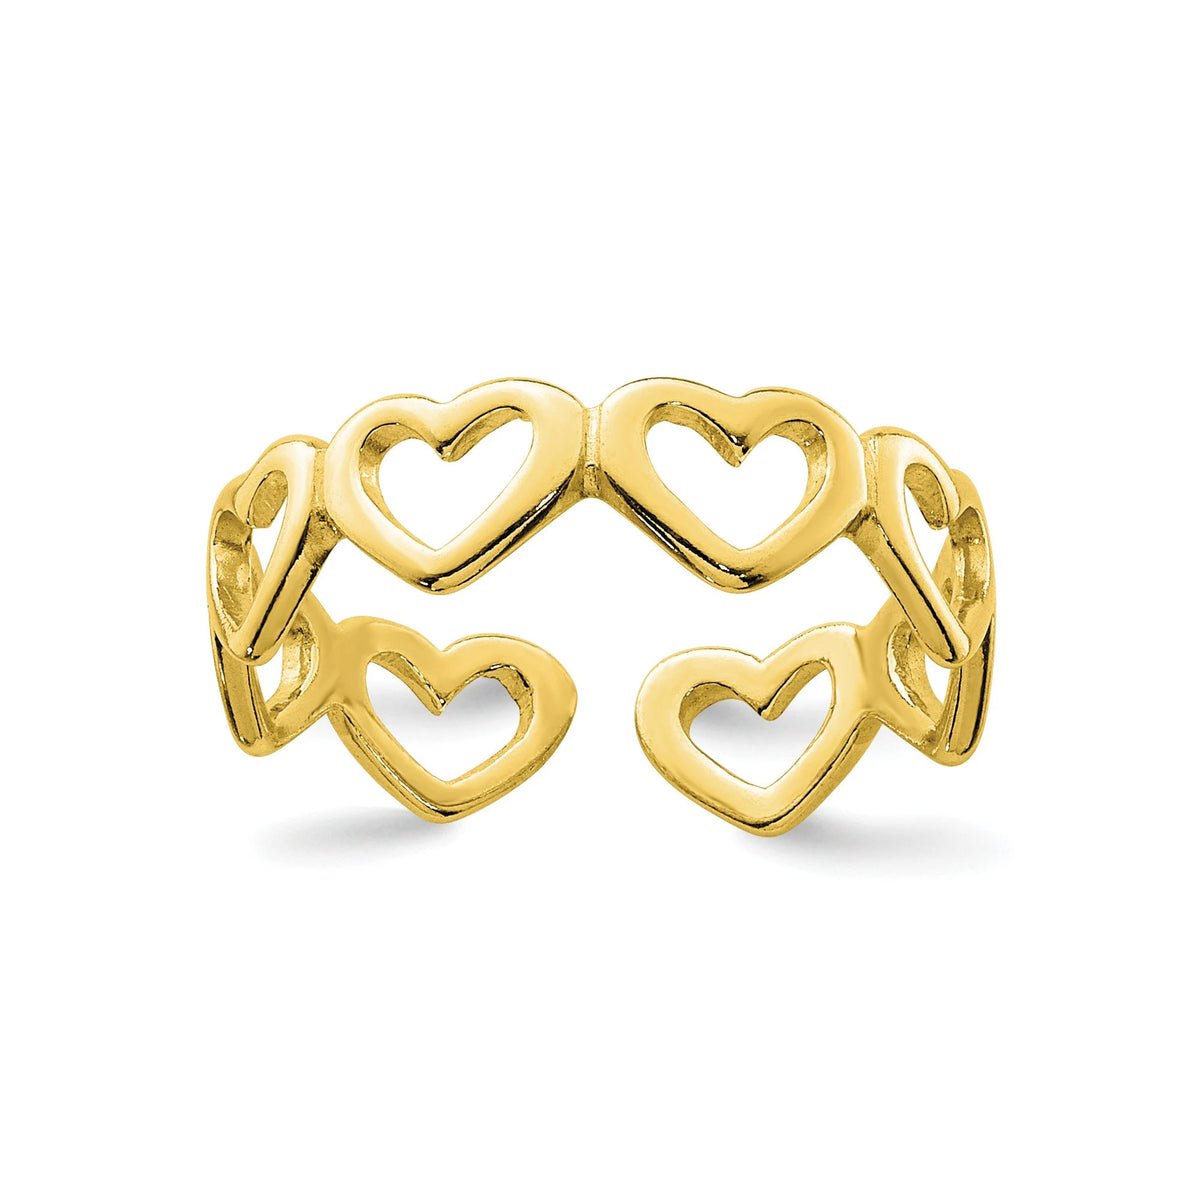 Gold Plated Sterling Silver Open Hearts Toe Ring 5mm Band- Adjustable Toe Ring Gift Box Included - Hearts Toe Ring - Ships Next Business Day